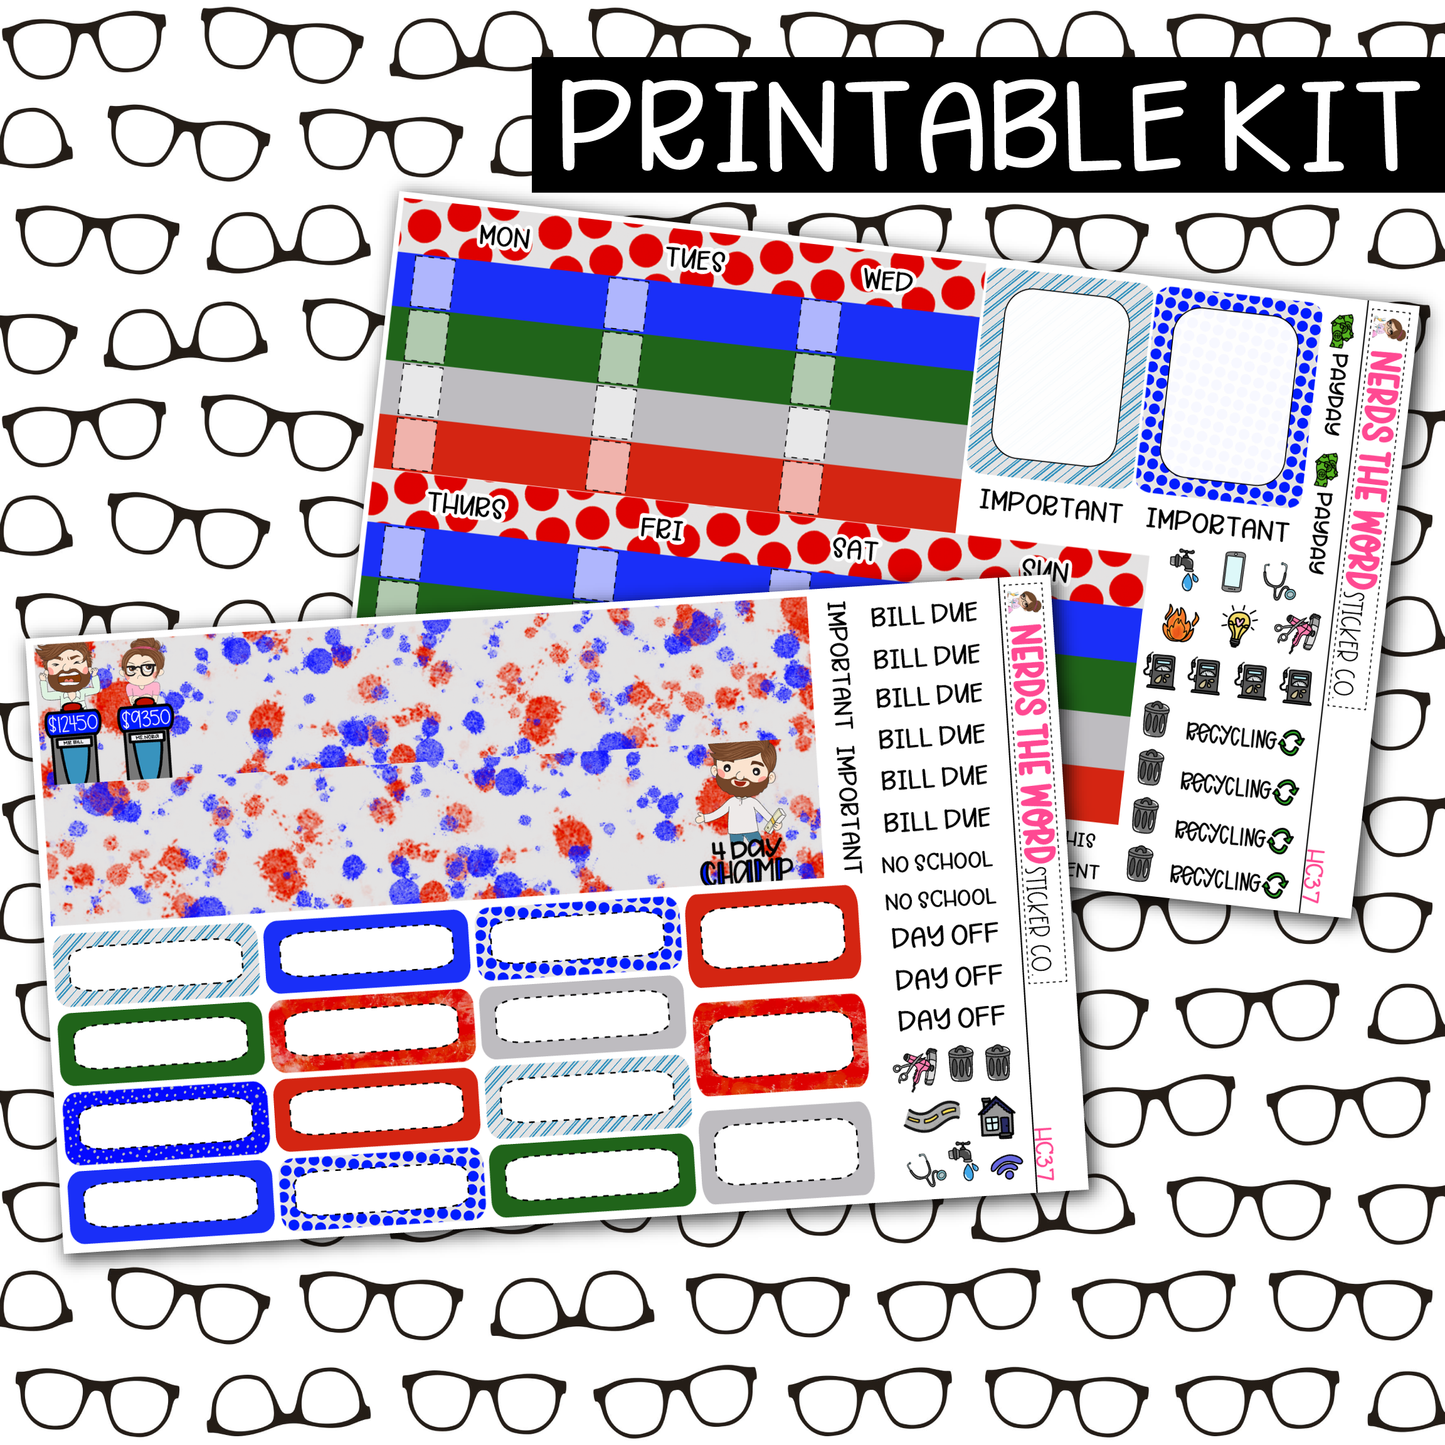 PRINTABLE What Is Monthly Kit - Choose your Size